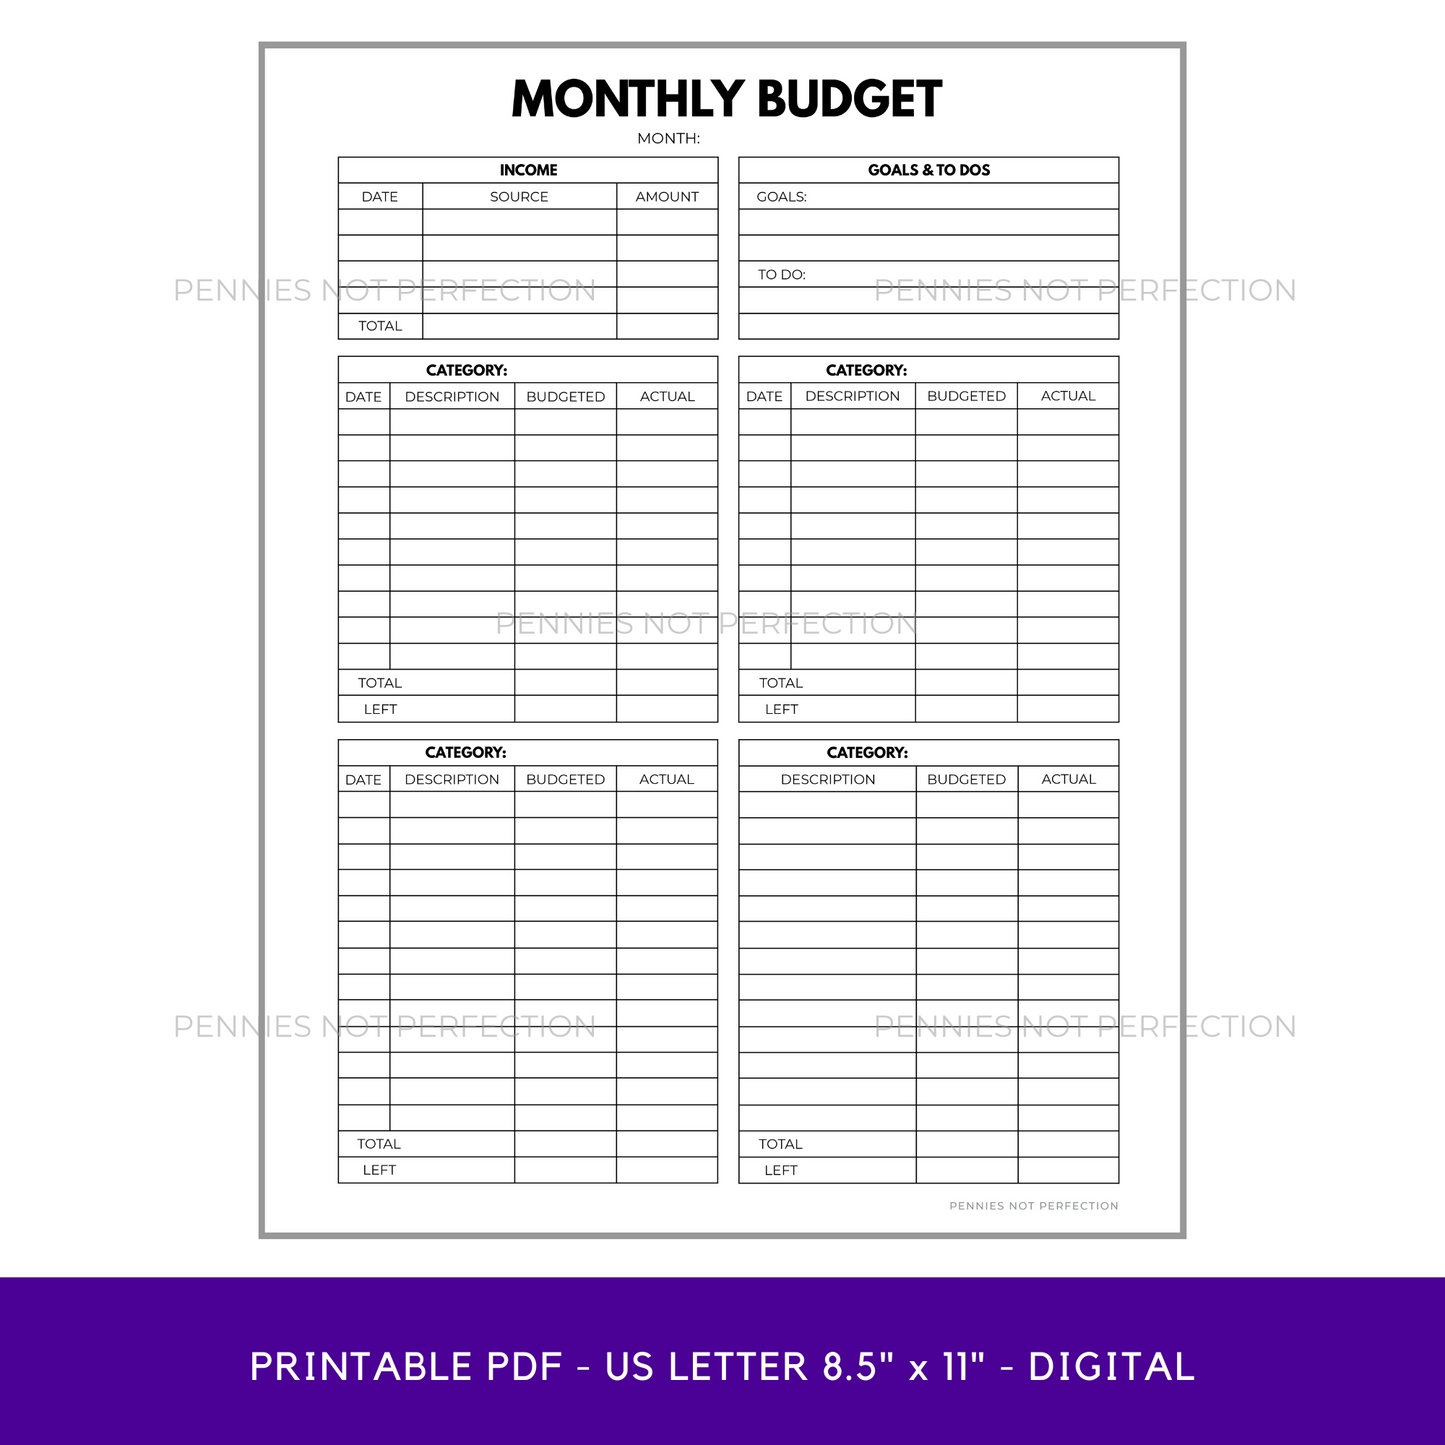 Monthly Budget Planner | Monthly Budget Tracker Printable